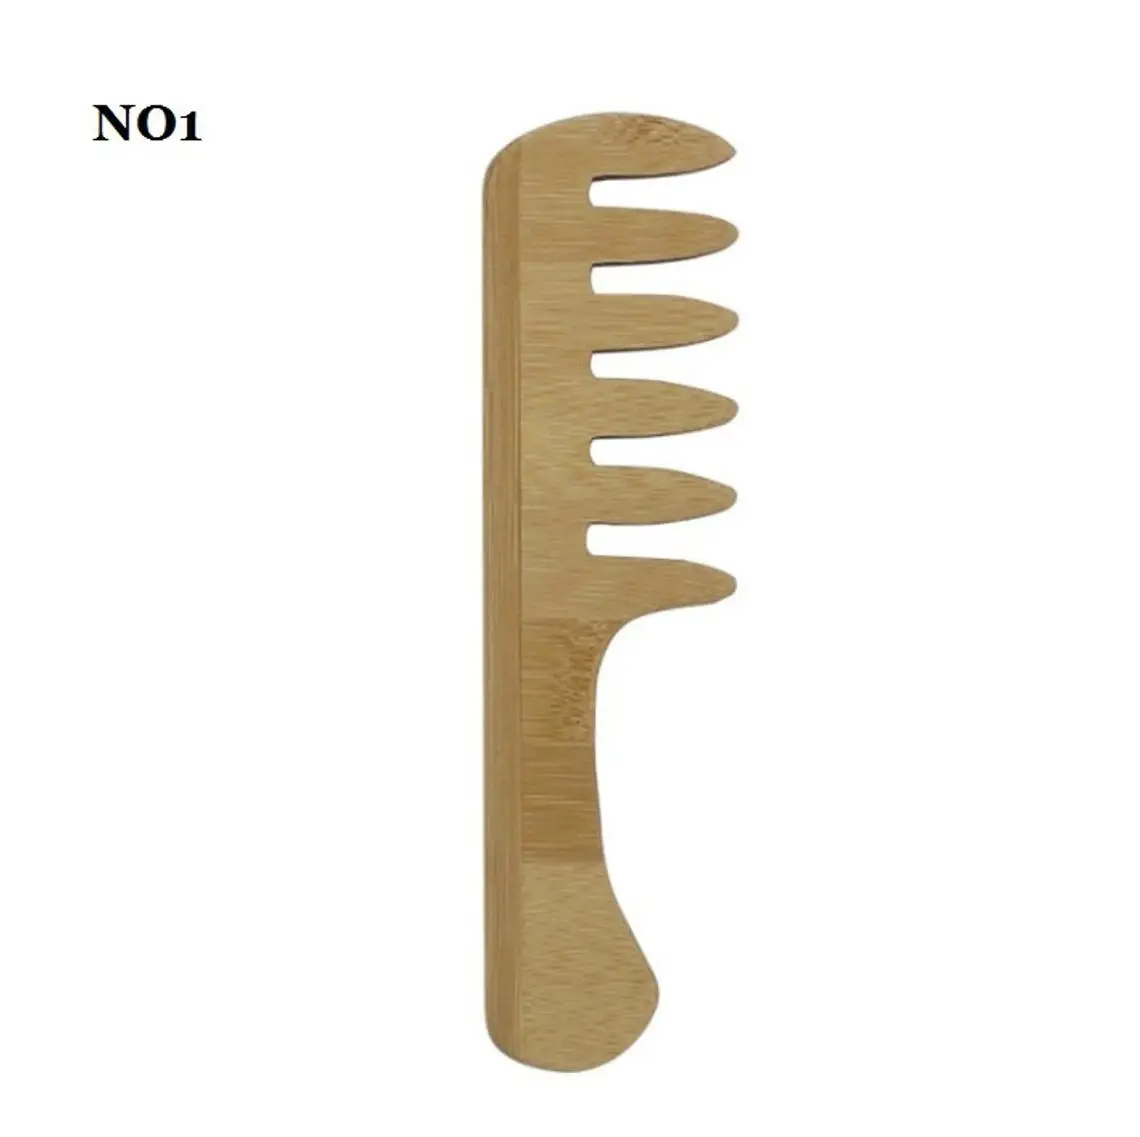 Afro Comb Bamboo Comb Wide Tooth Beard Care Comb Fork Combs Pick Comb Hair Brush